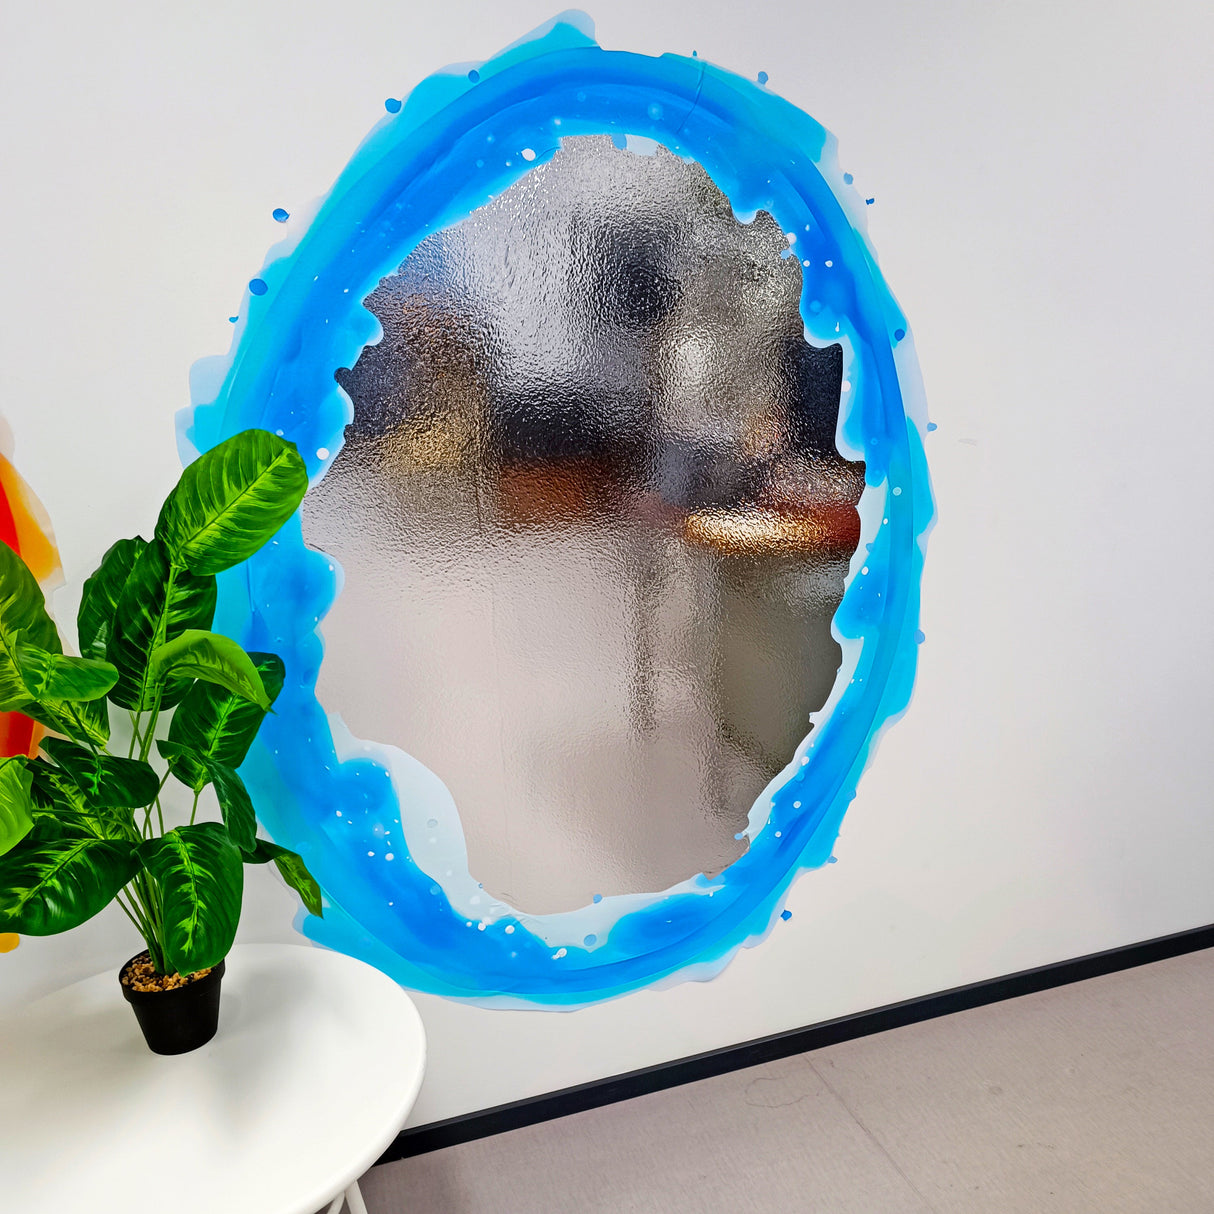 Custom Blue & Orange Portal Wall Stickers With Your own Image inside - Personalized Photo Inside, Vibrant Aura Oval Decals for Gamer and Geek Room Decor